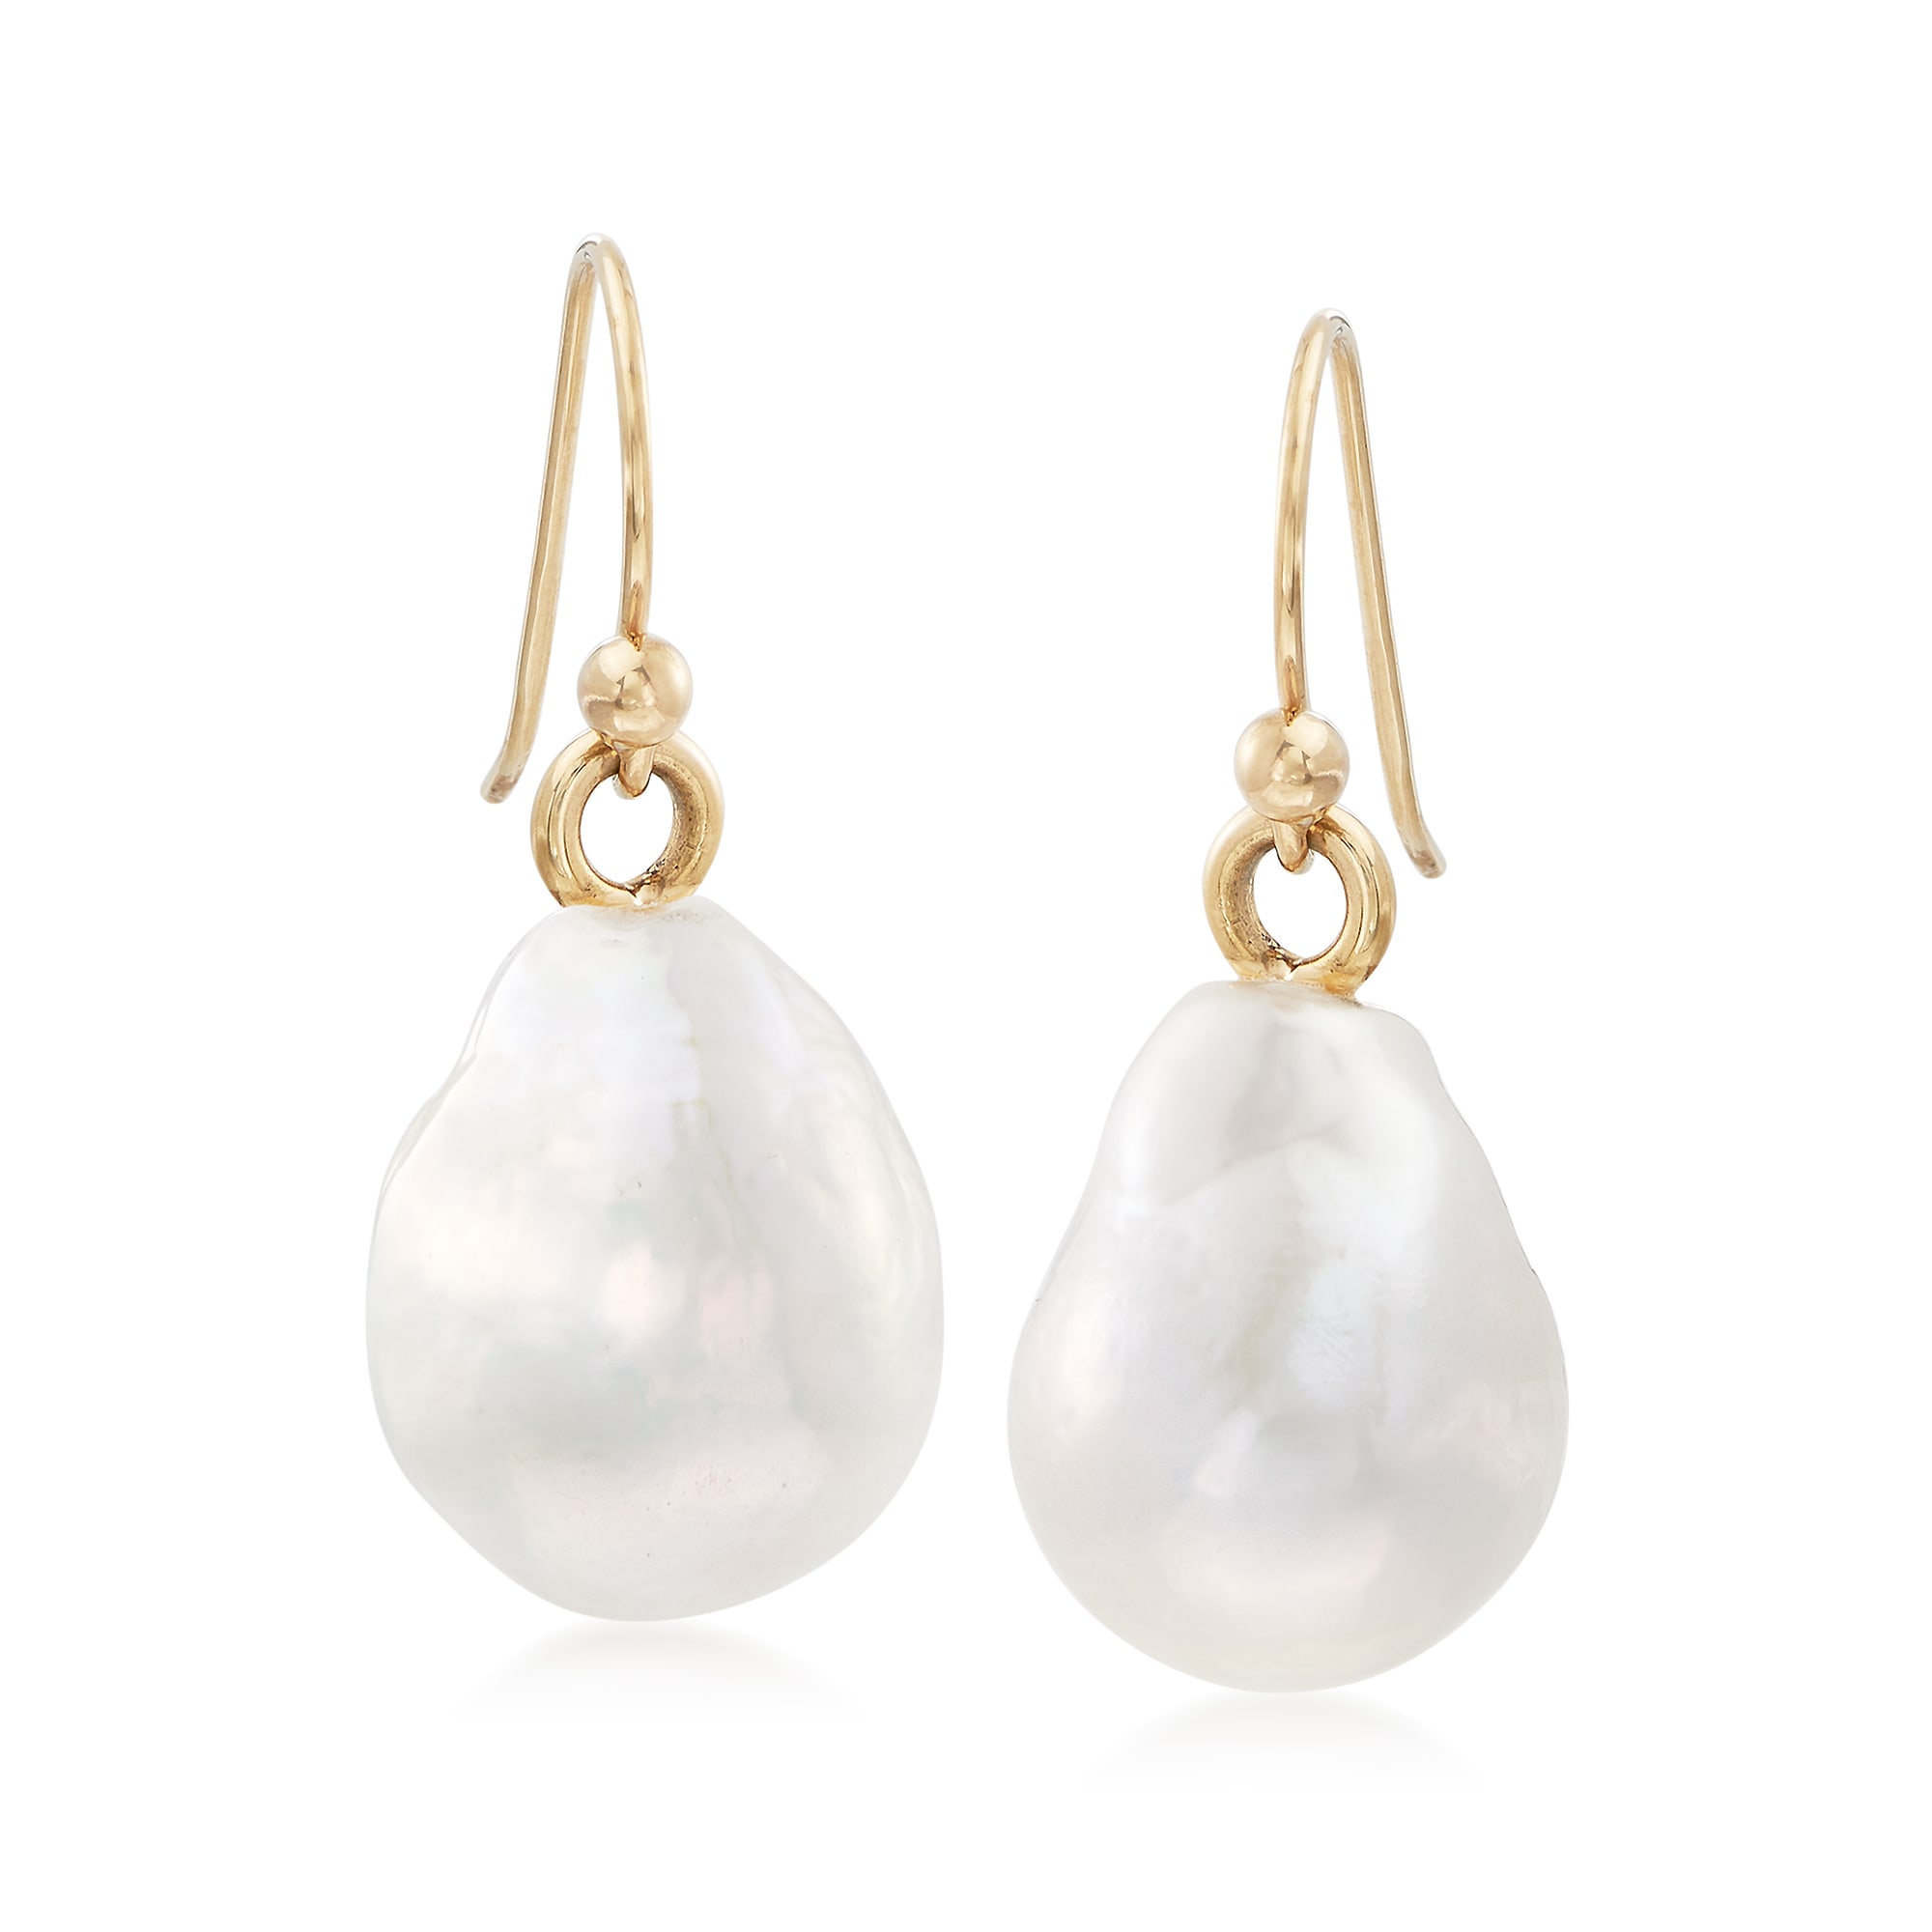 12-14mm Cultured Baroque Pearl Drop Earrings in 14kt Yellow Gold | Ross ...